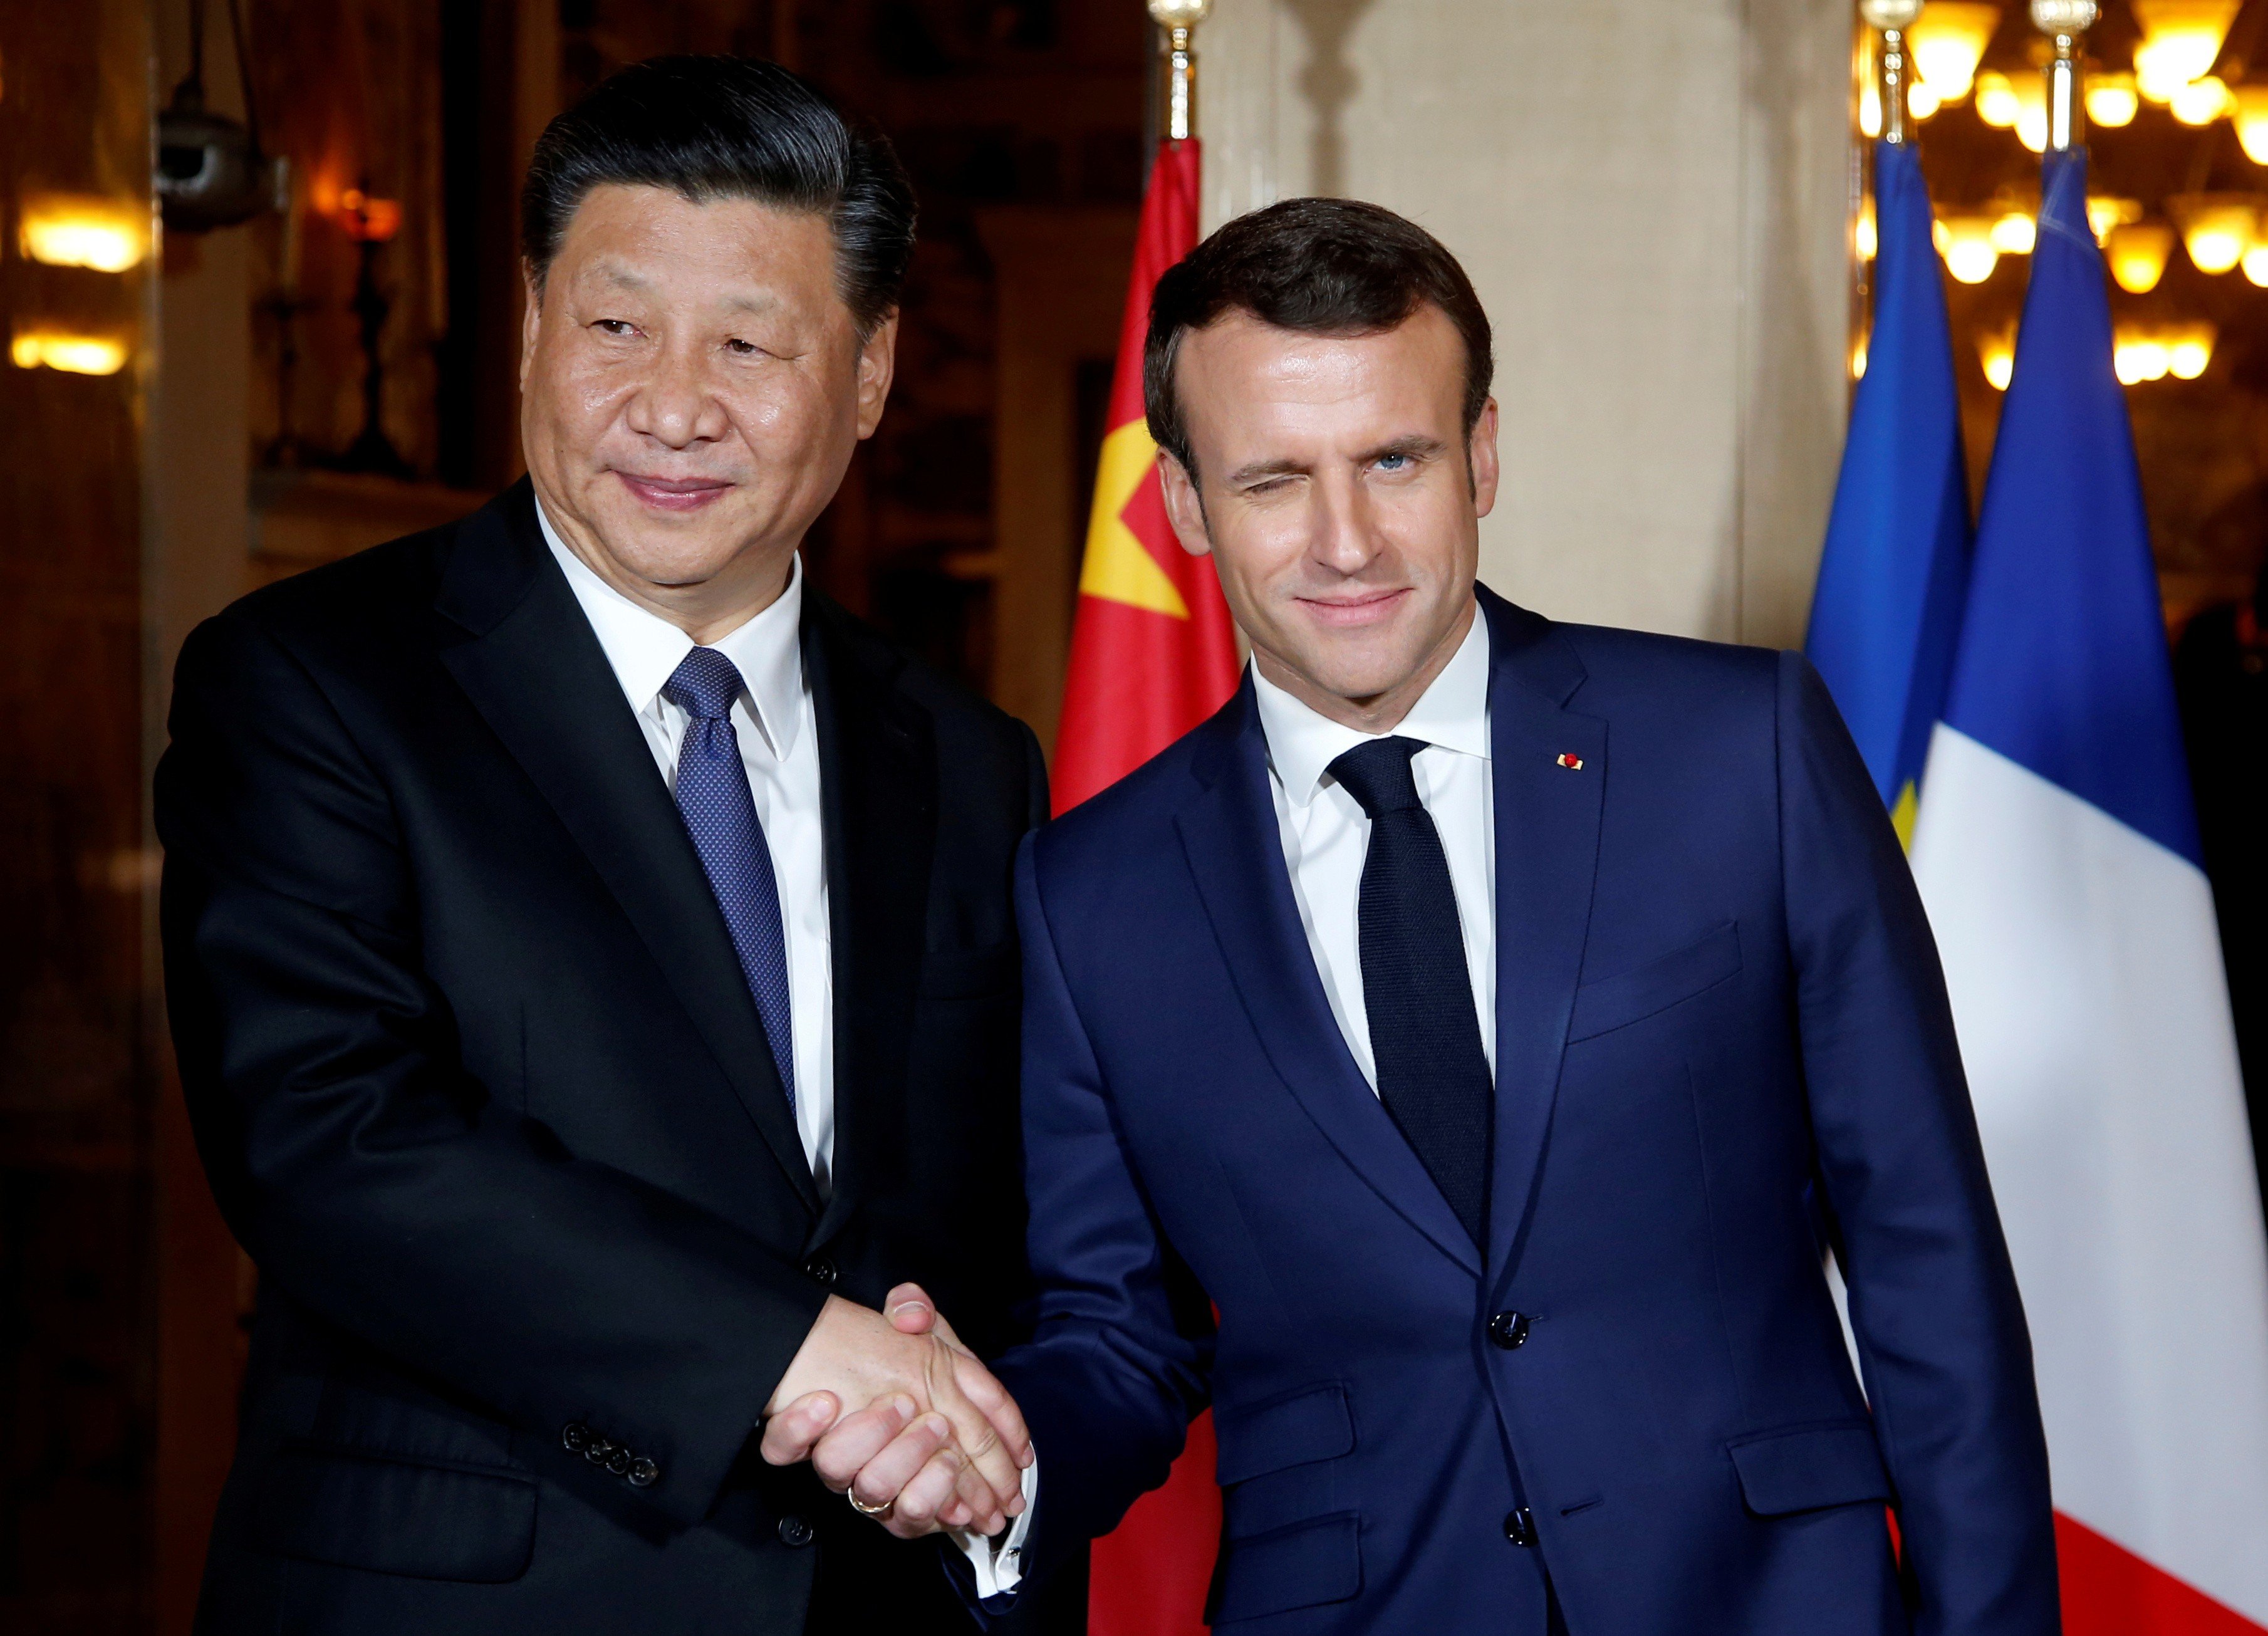 French President Emmanuel Macron shakes hands with Chinese President Xi Jinping as he arrives for a dinner at the Villa Kerylos in Beaulieu-sur-Mer, near Nice, France, on March 24. Photo: Reuters